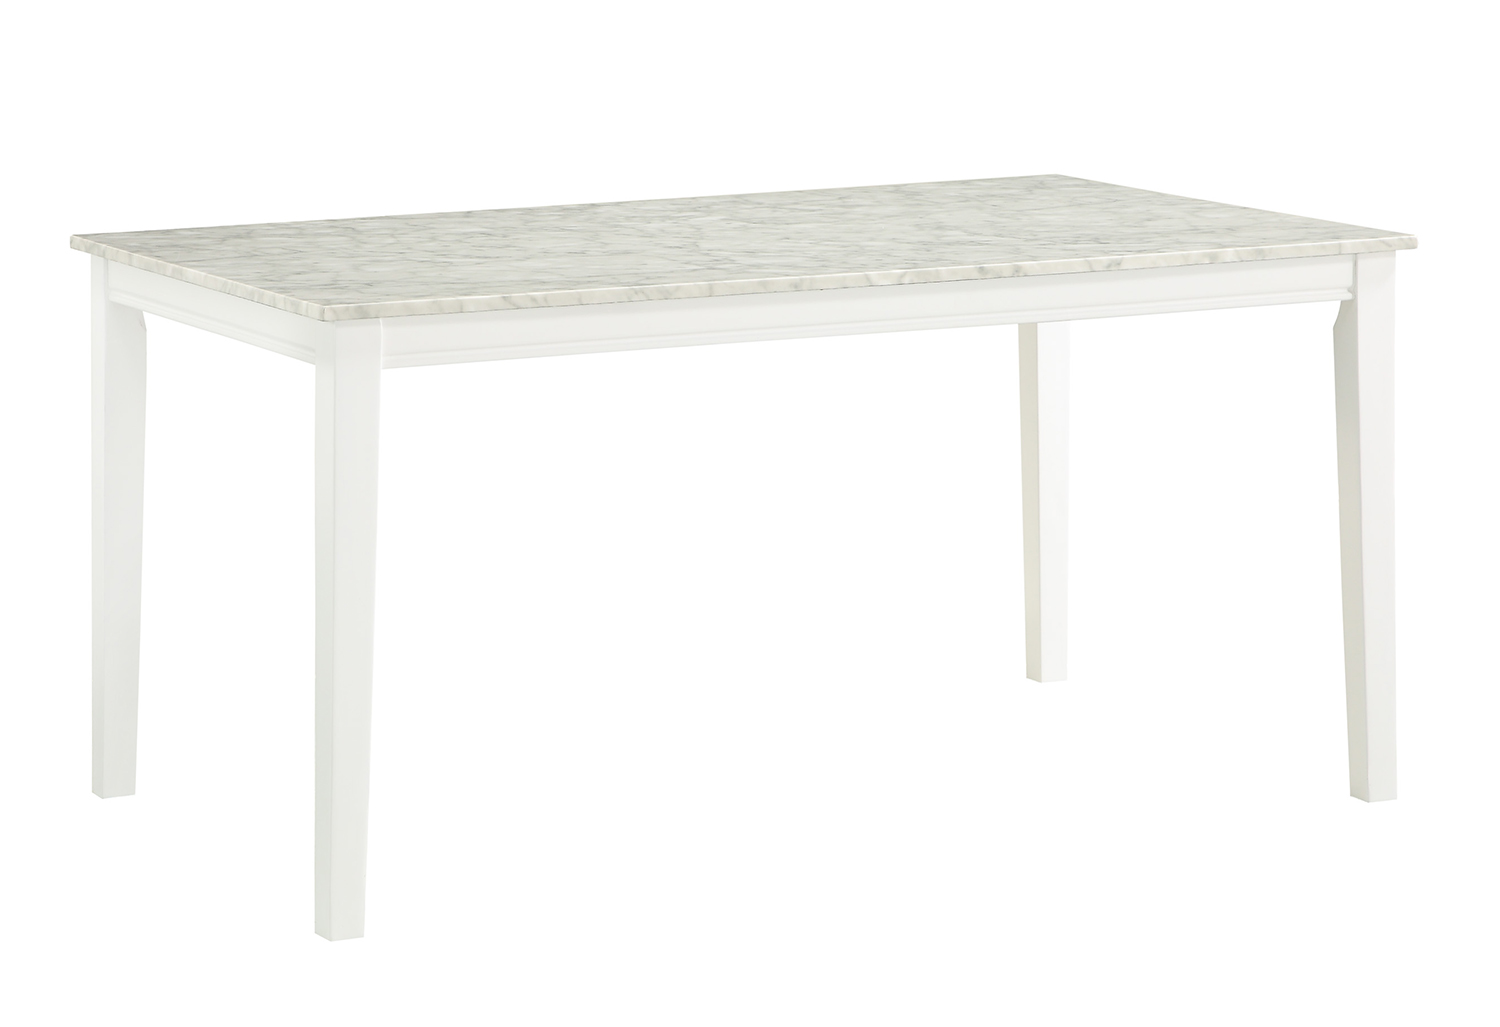 Homelegance Nadalia Dining Table - Faux Marble Top - White